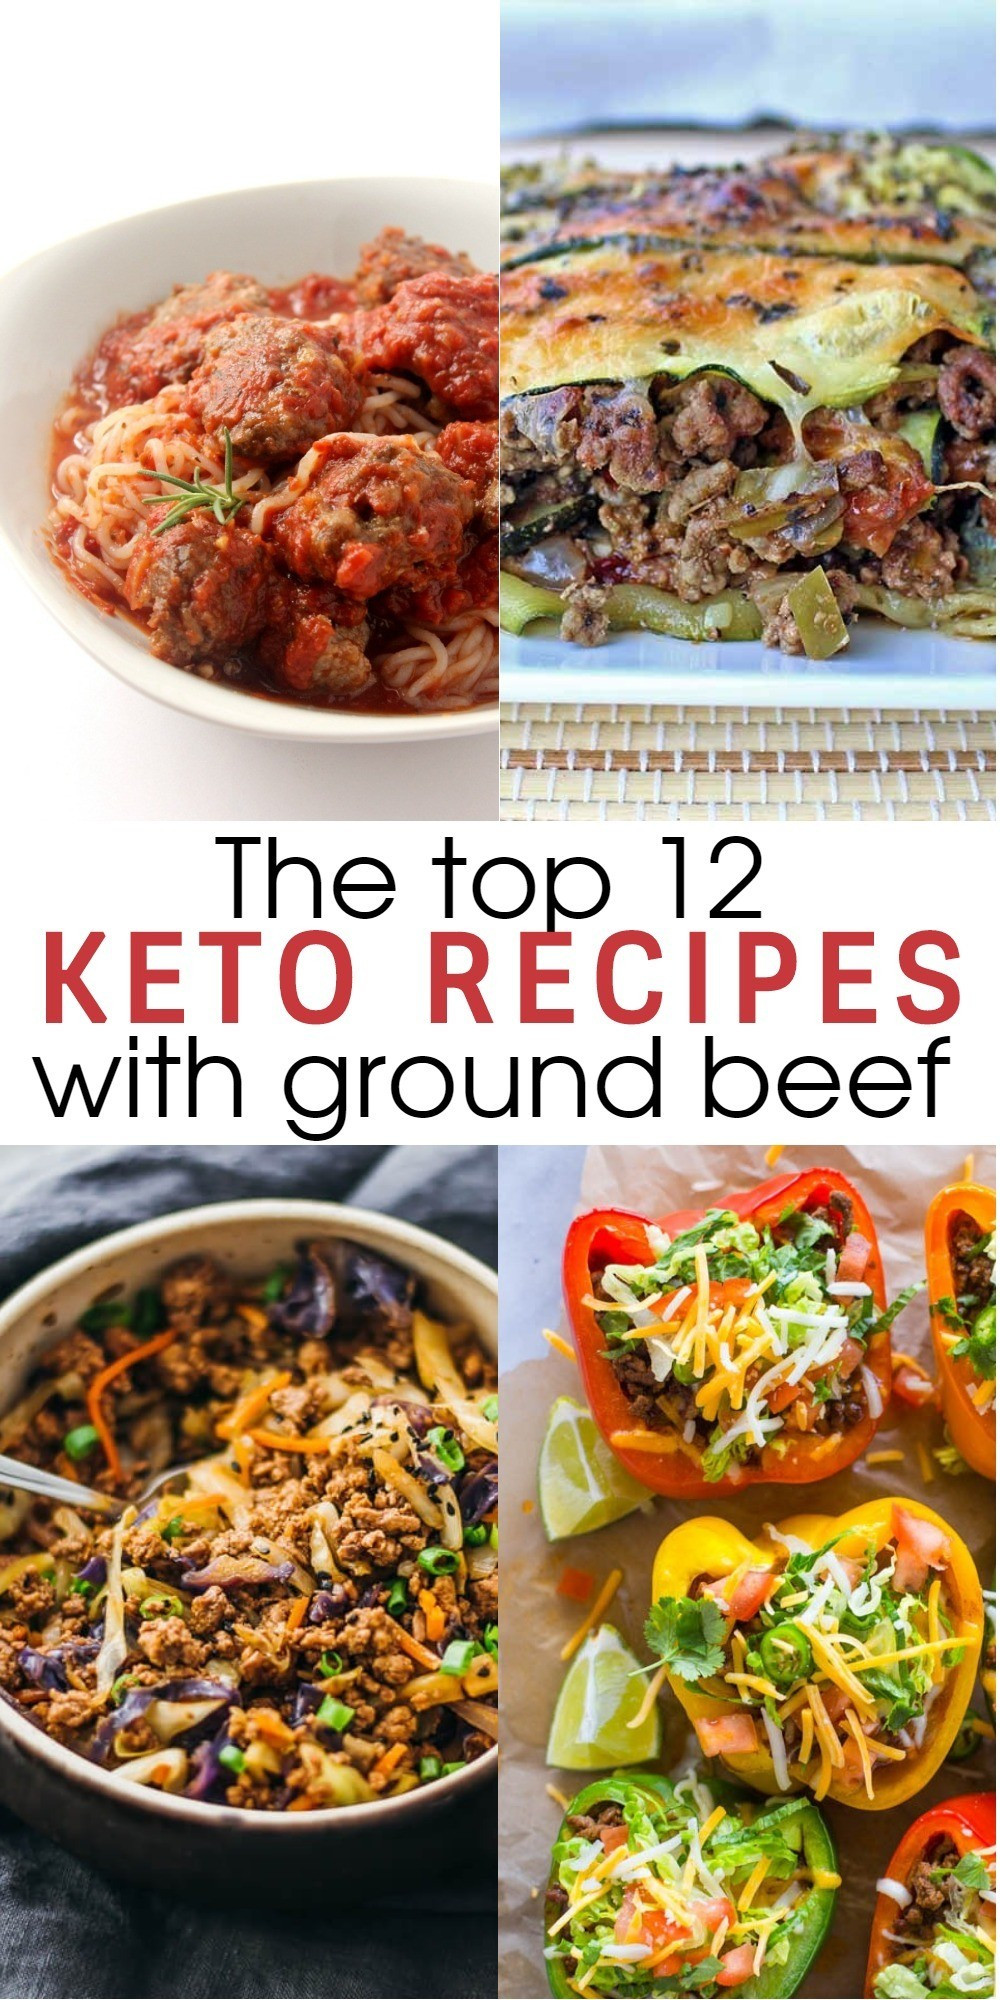 Ground Beef Keto Recipes For Dinner Easy
 12 Flavorful and Easy Keto Recipes With Ground Beef To Try